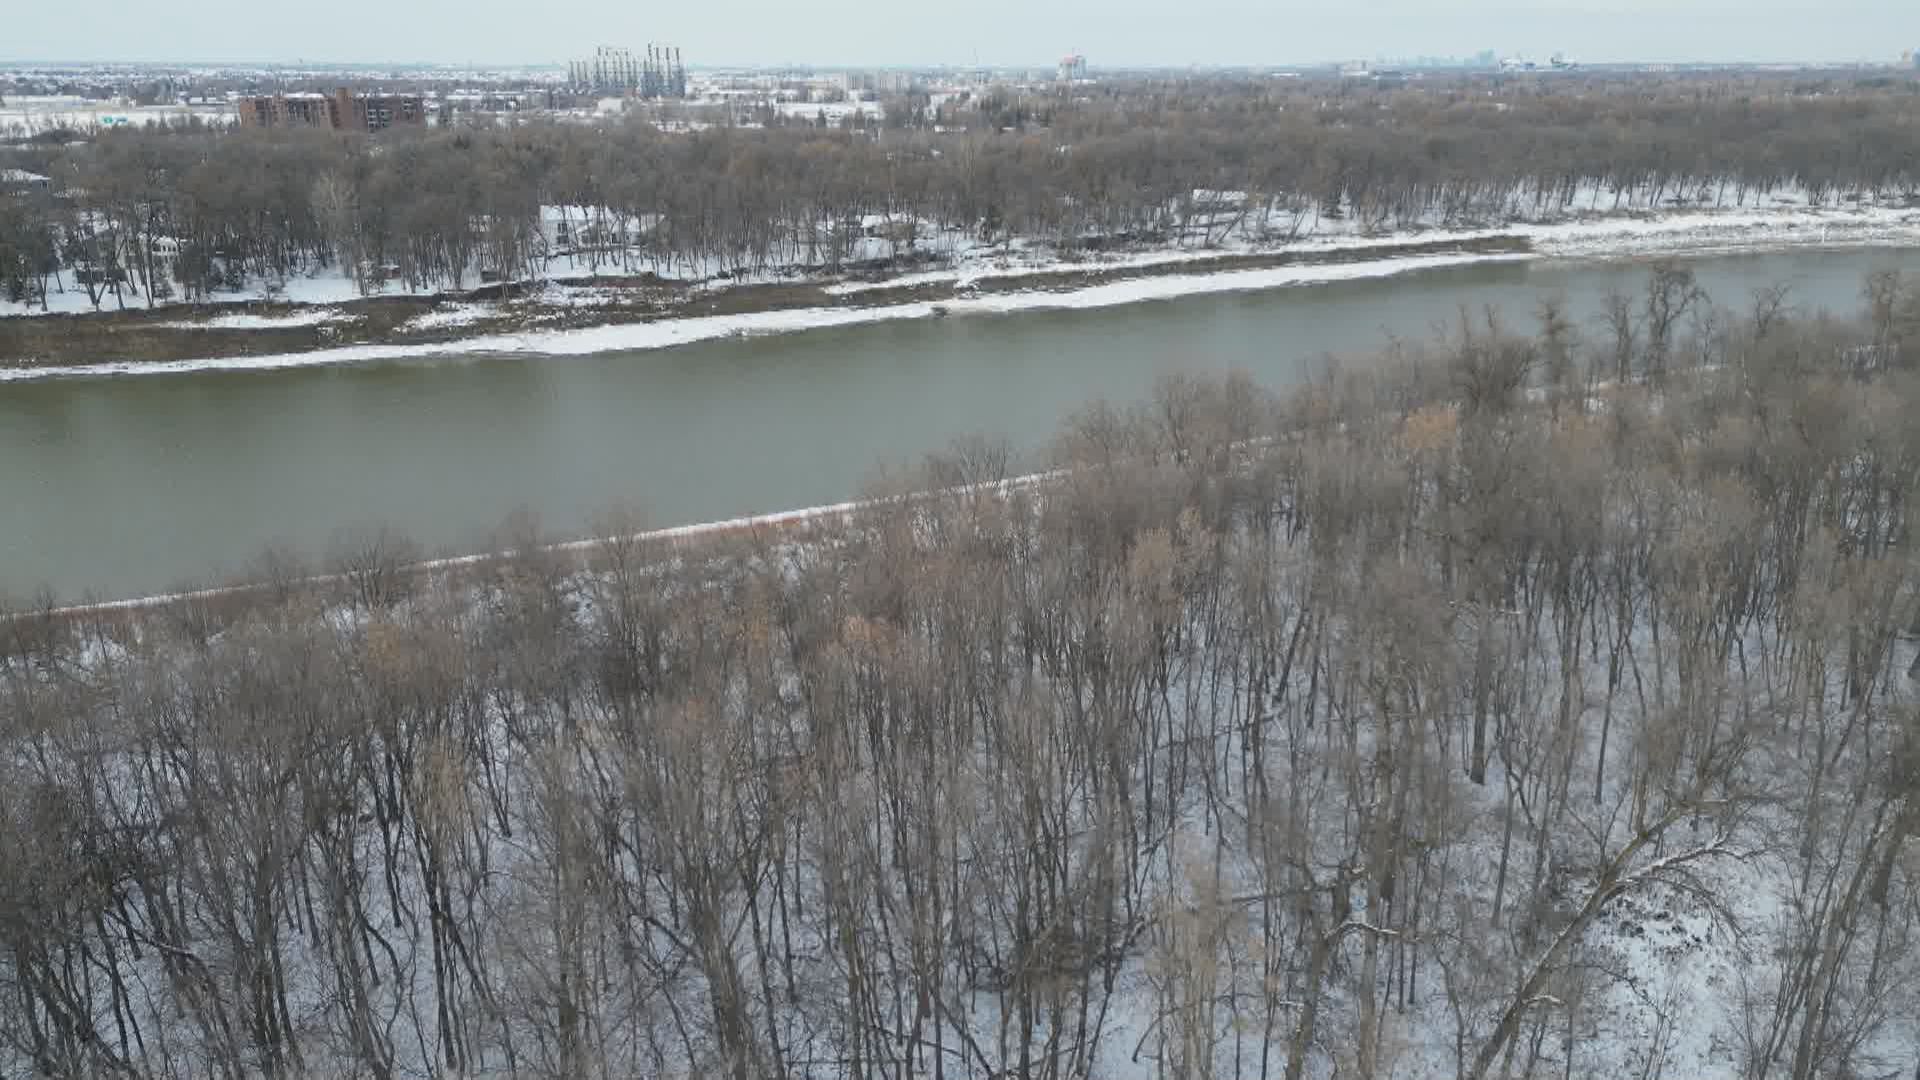 Winnipeg committee upholds motion not to demolish home, gateway to
Lemay Forest development